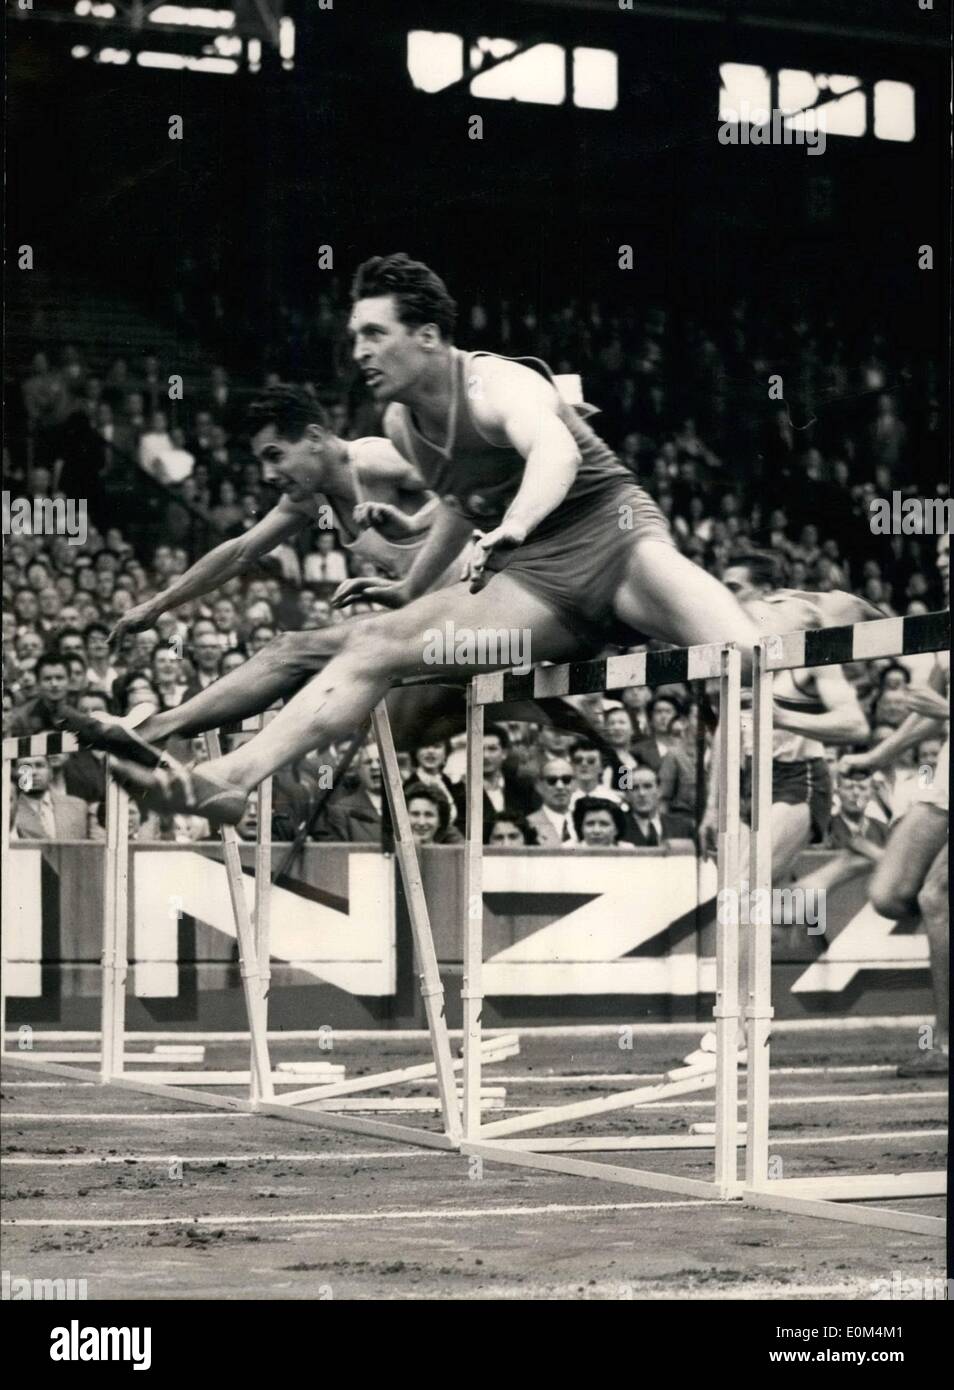 Jul. 07, 1953 - Athletic games national championship at Colombes; Chardel (at the further end) winning the 110 meters hurdles beating Ignace, Heinrich. Stock Photo